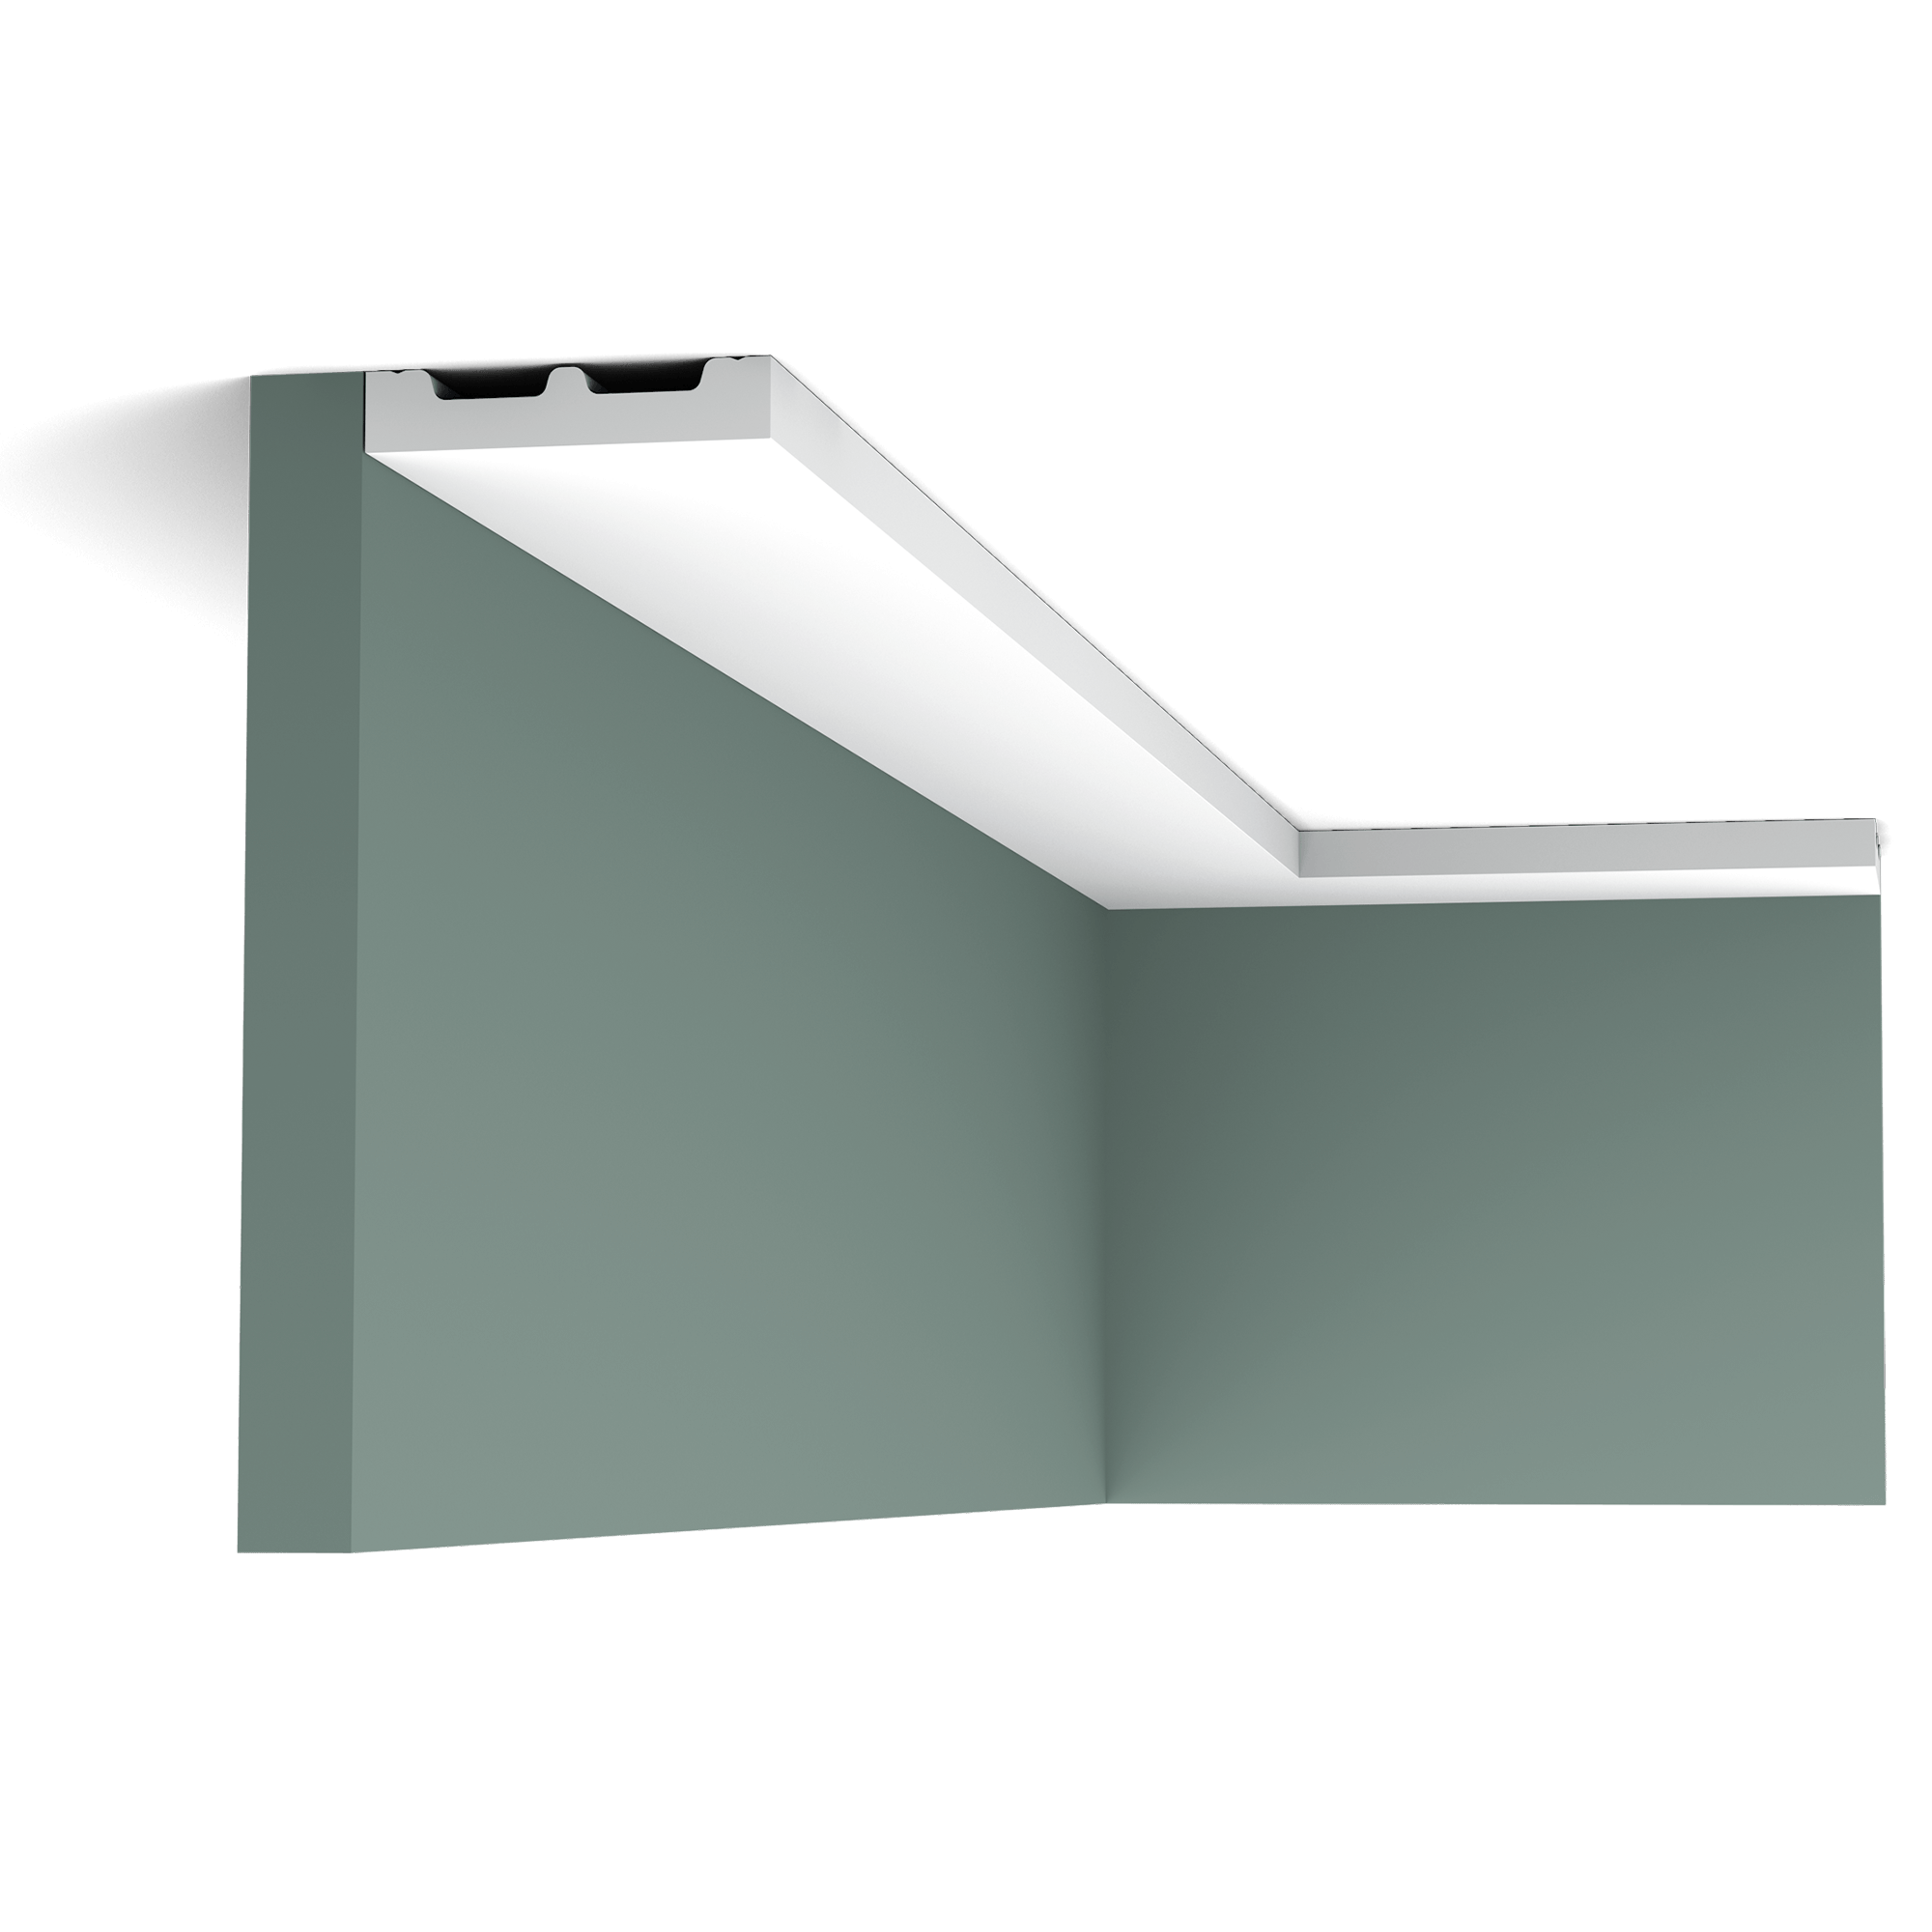 Our simplest cornice moulding is part of the SQUARE family. Use this multifunctional profile to fit your entire home with the same cornice moulding. All you need to do is select the correct size to fit your space.